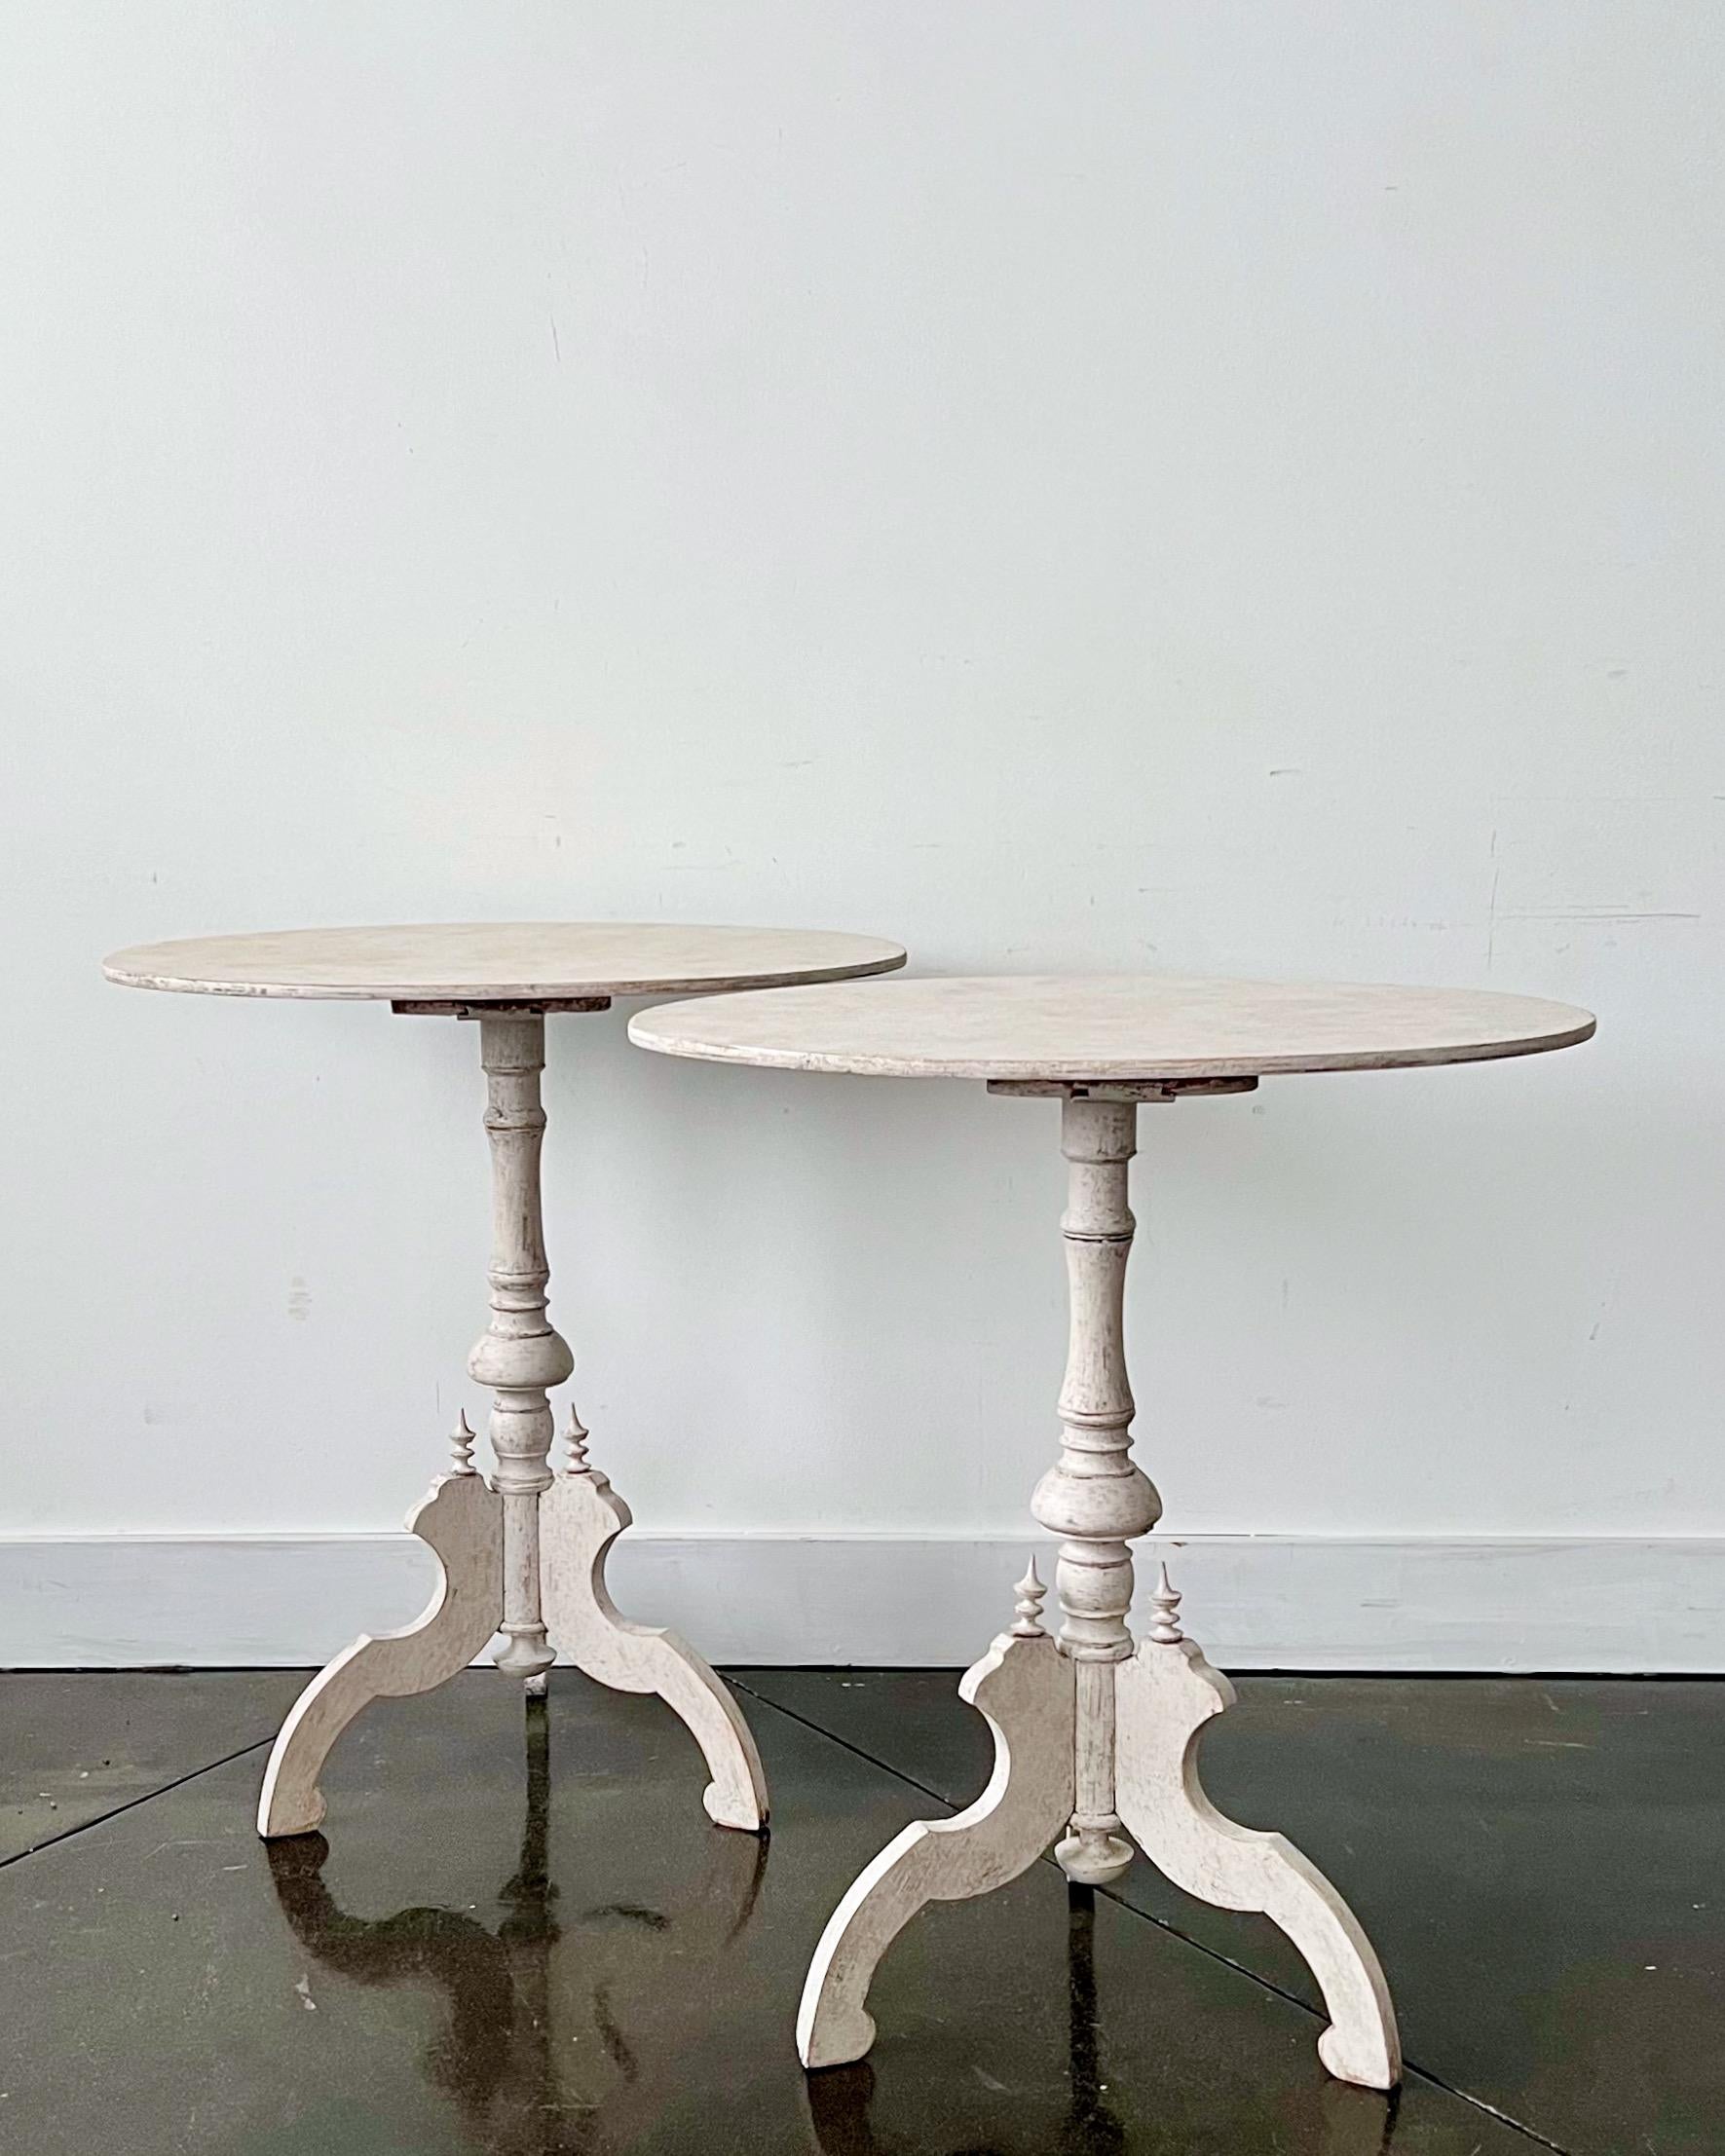 A pair of charming  pedestal tables with oval tops and turned bases supported by intricately carved scrolling legs in Gustavian style.
Värmland, Sweden, circa 1850.